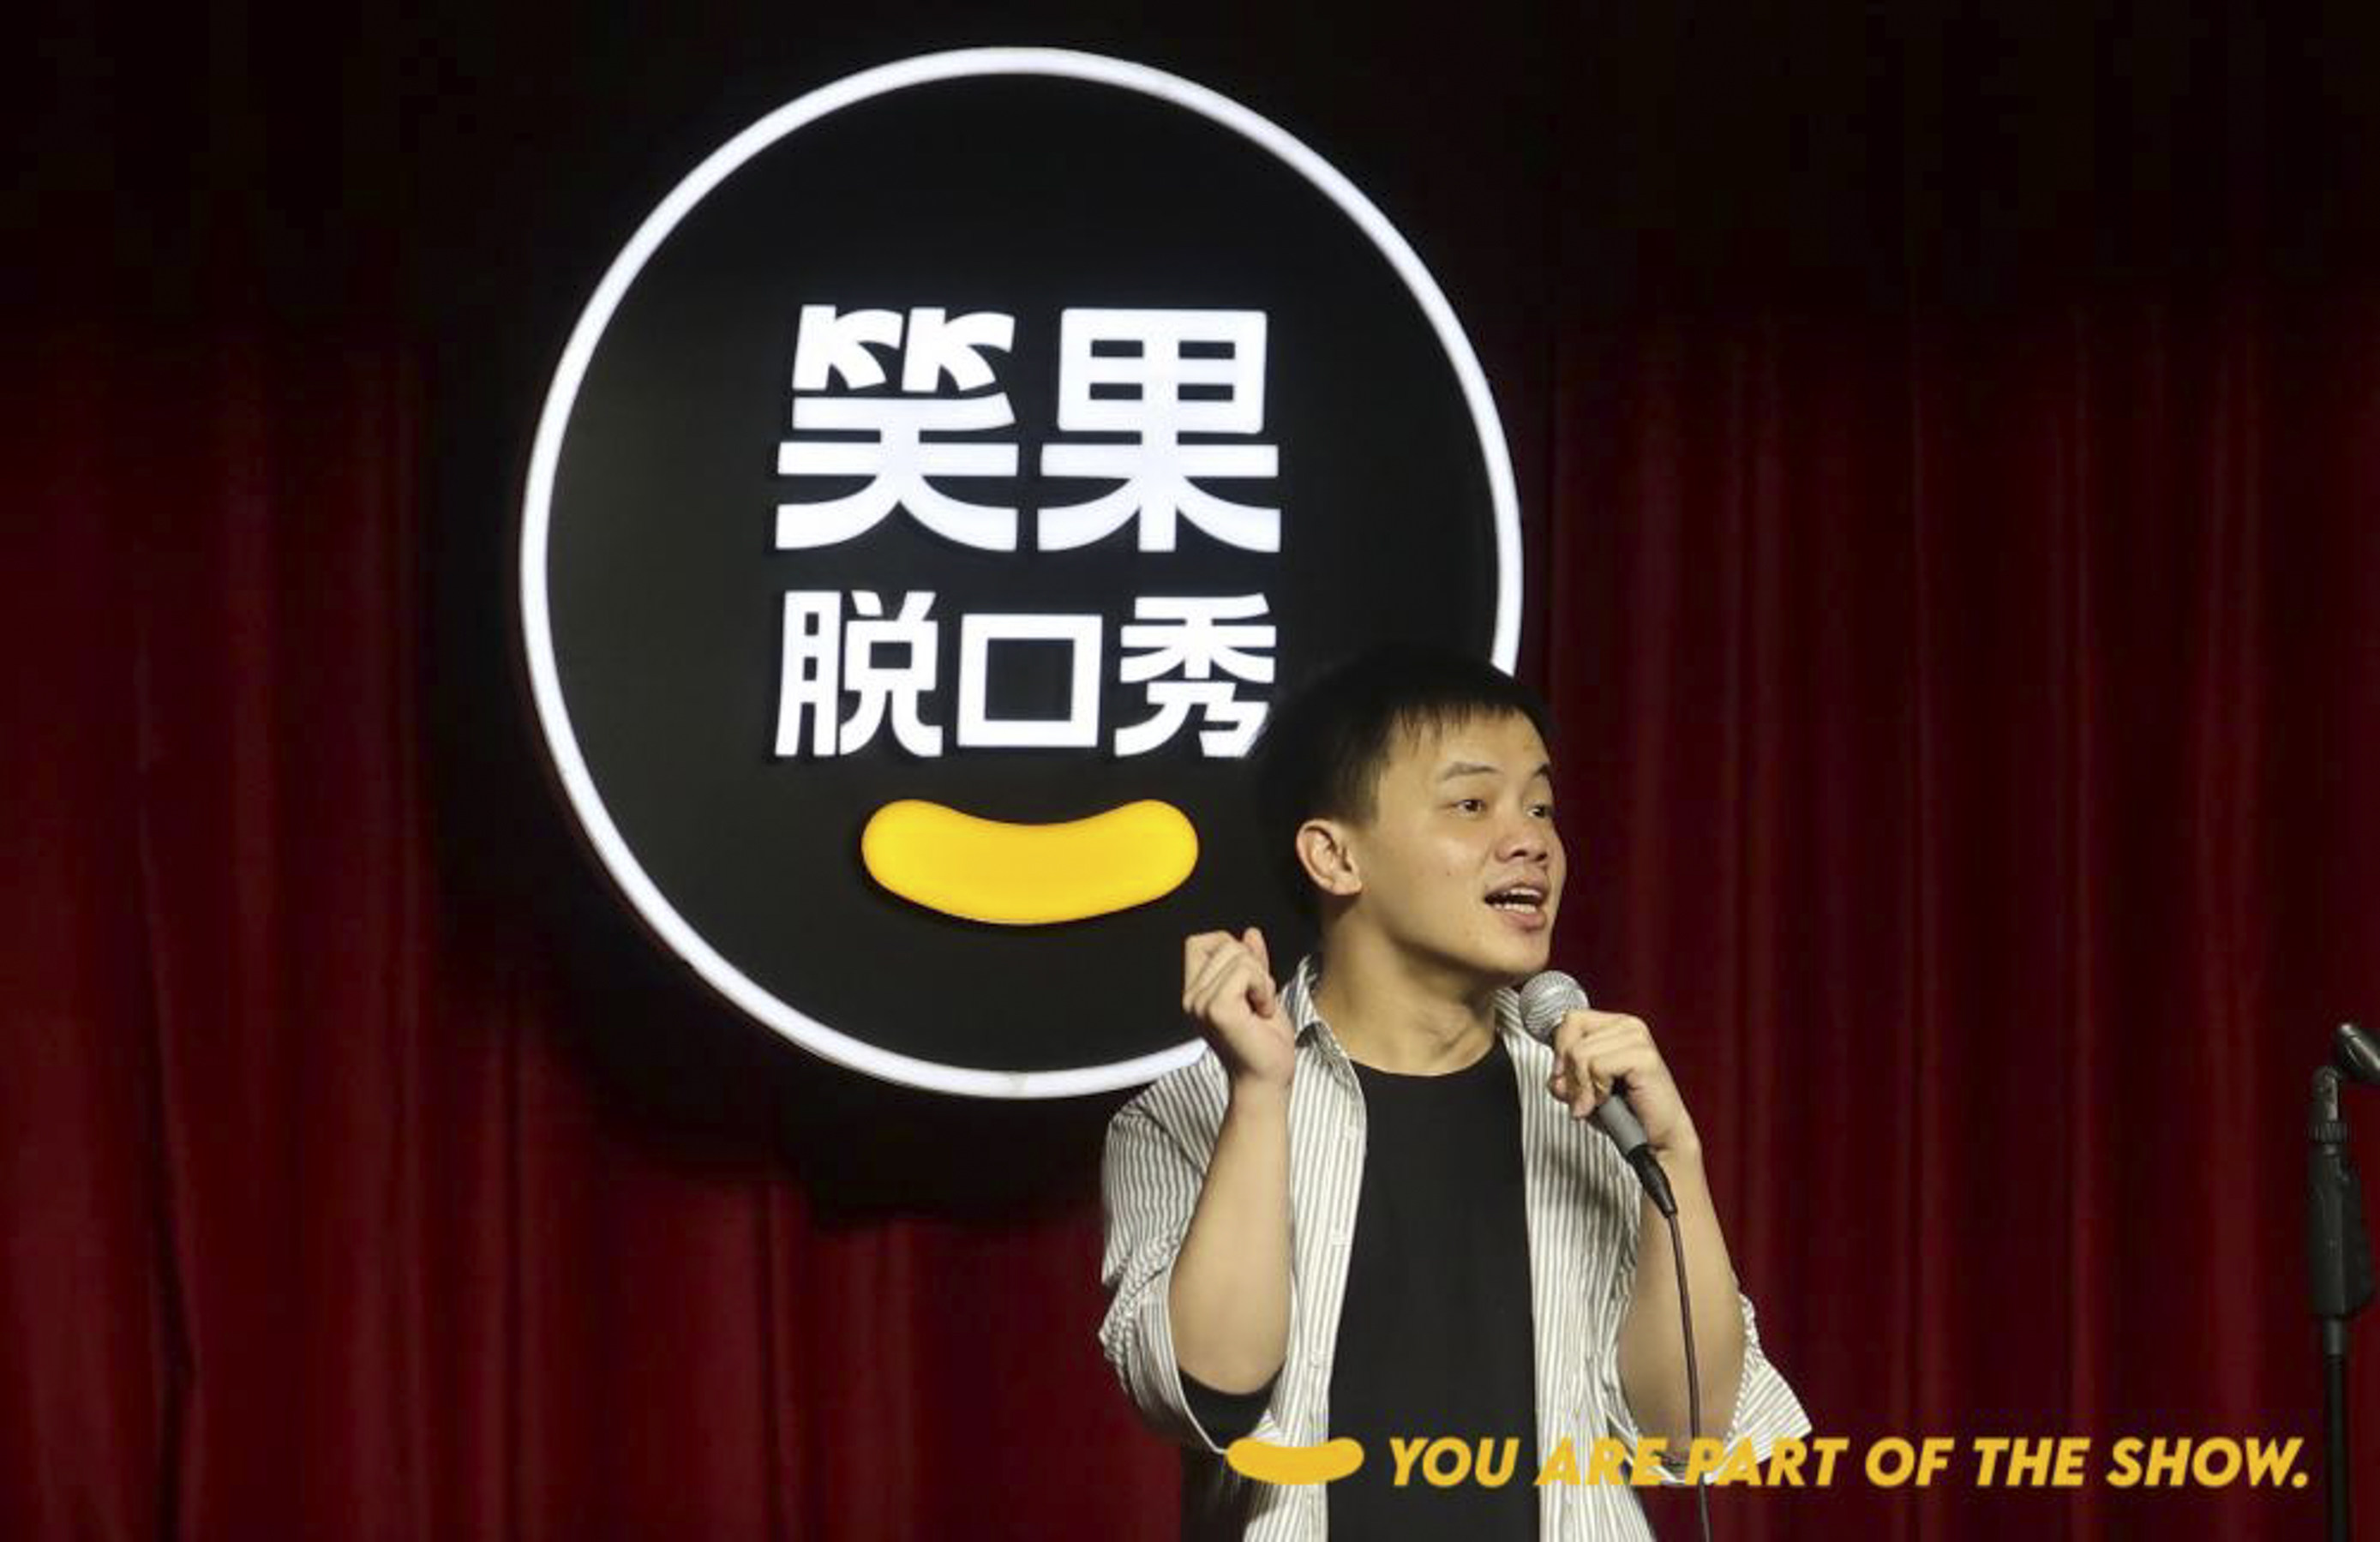 Zhang performs his comedy in Shanghai five nights a week. Photo: Handout 